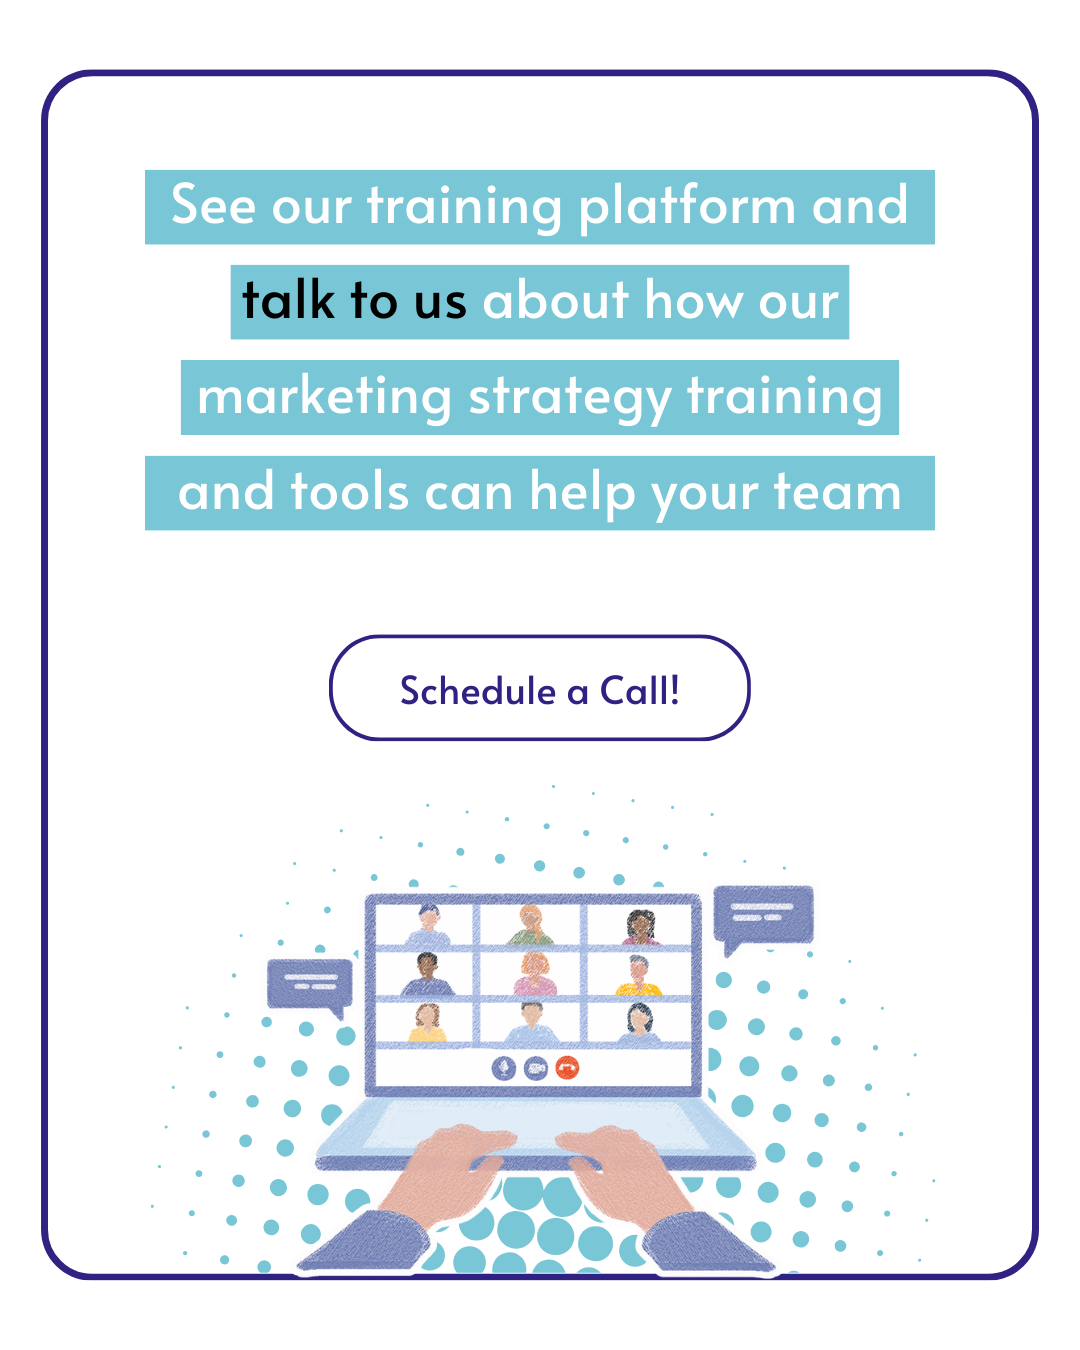 Schedule a call to talk about how GOTO Market Institute's marketing training can help your team.